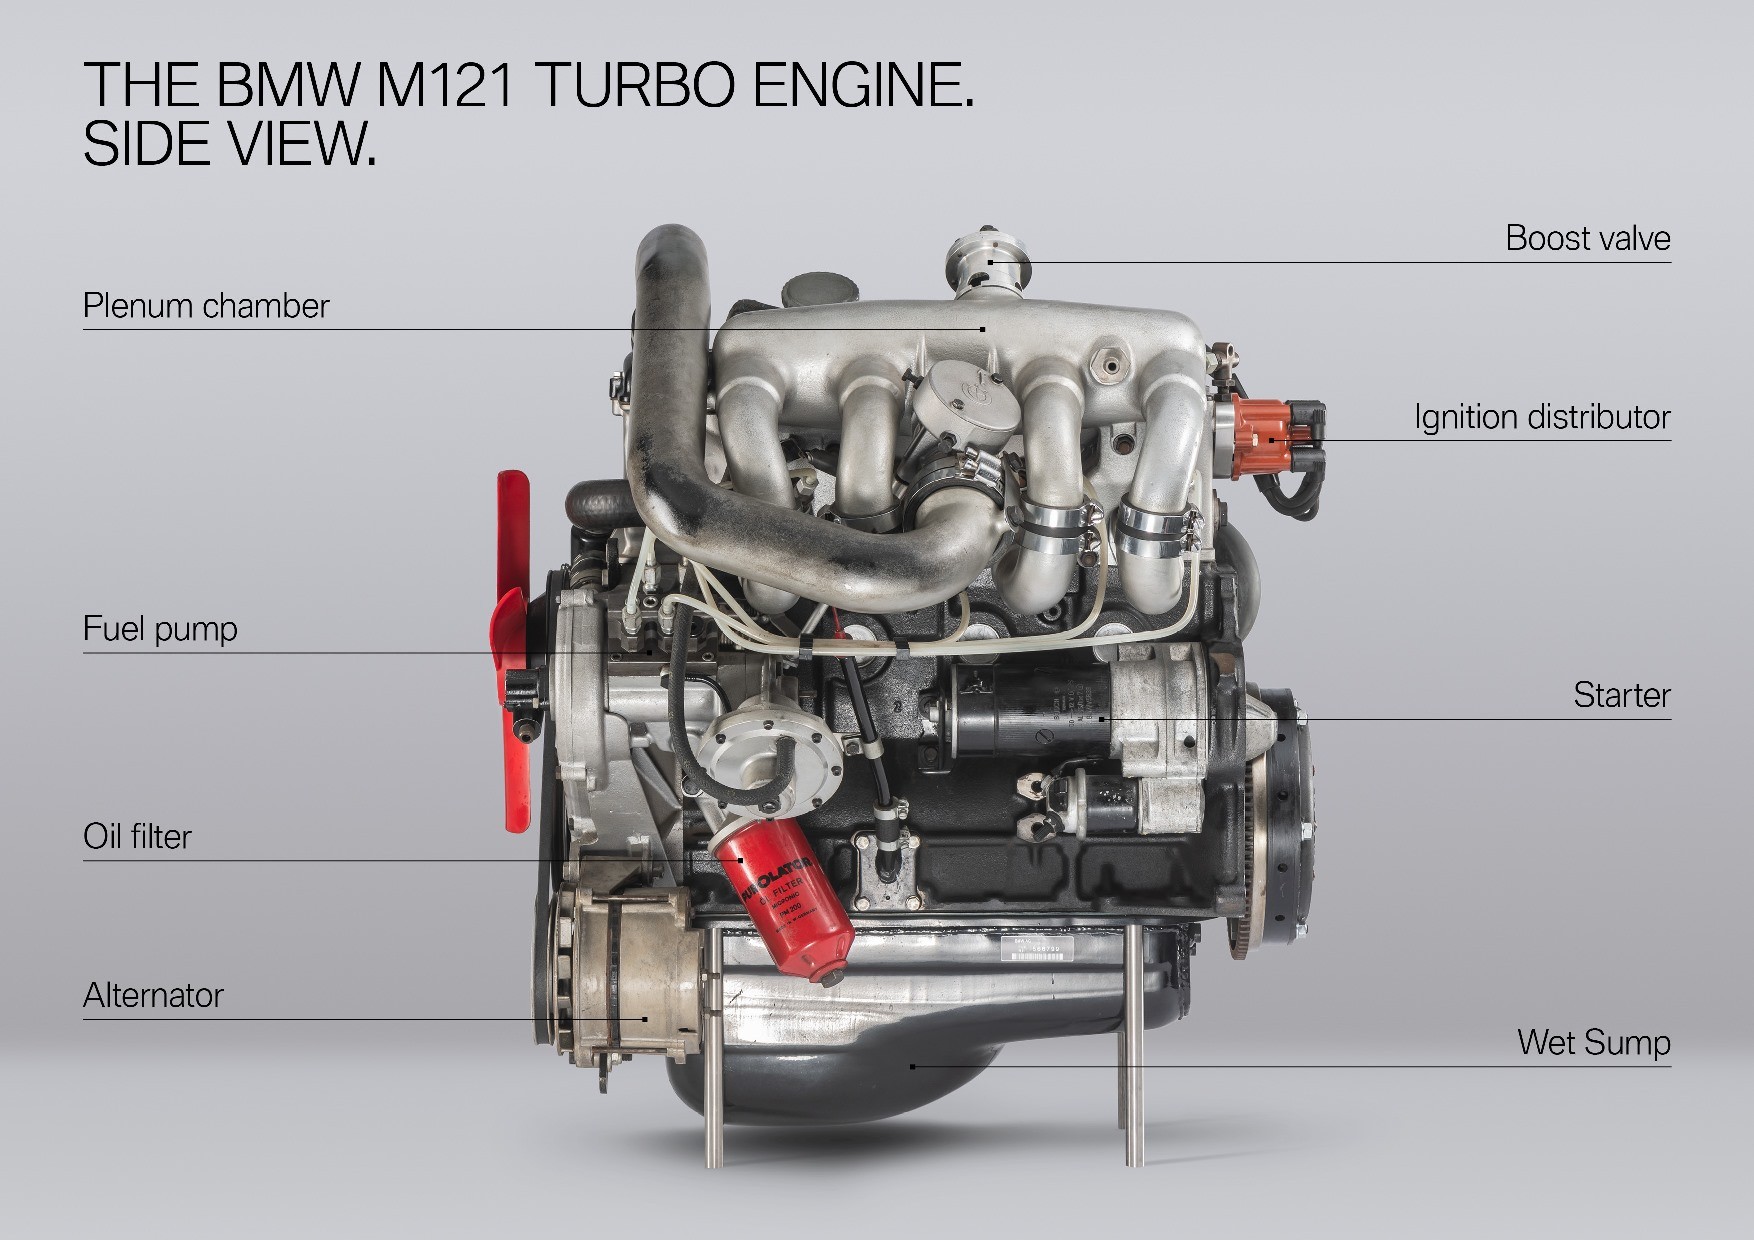 heres-a-list-of-bmw-turbo-racing-engines-with-pictures_16.jpg